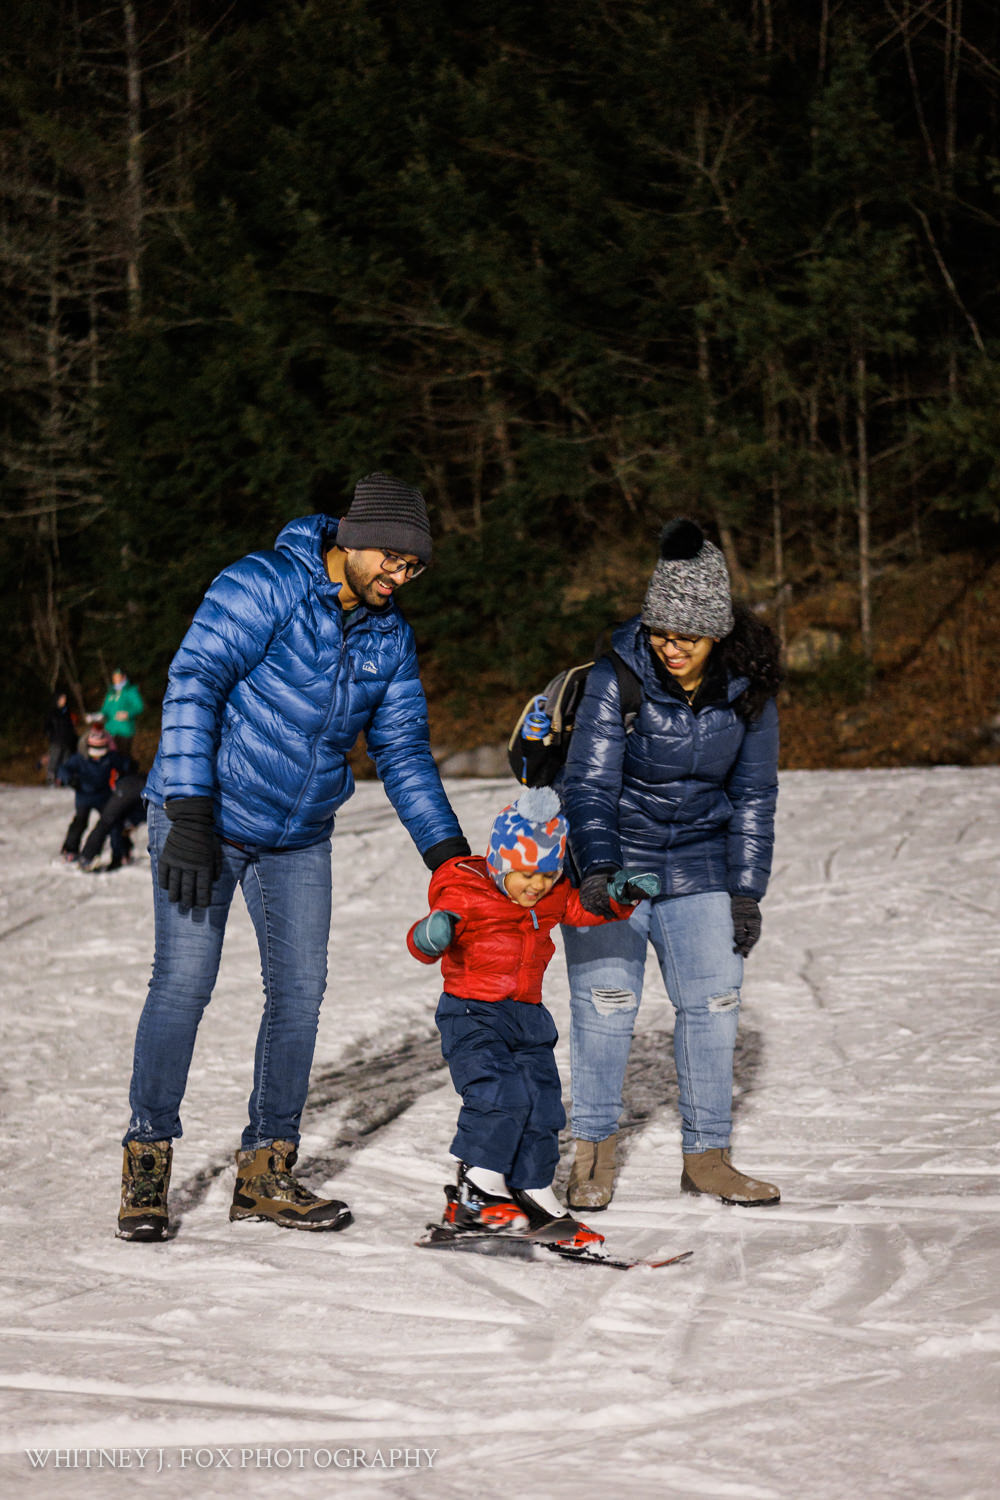 690 winter kids welcome to winter 2022 lost valley auburn maine documentary event photographer whitney j fox 4093 w